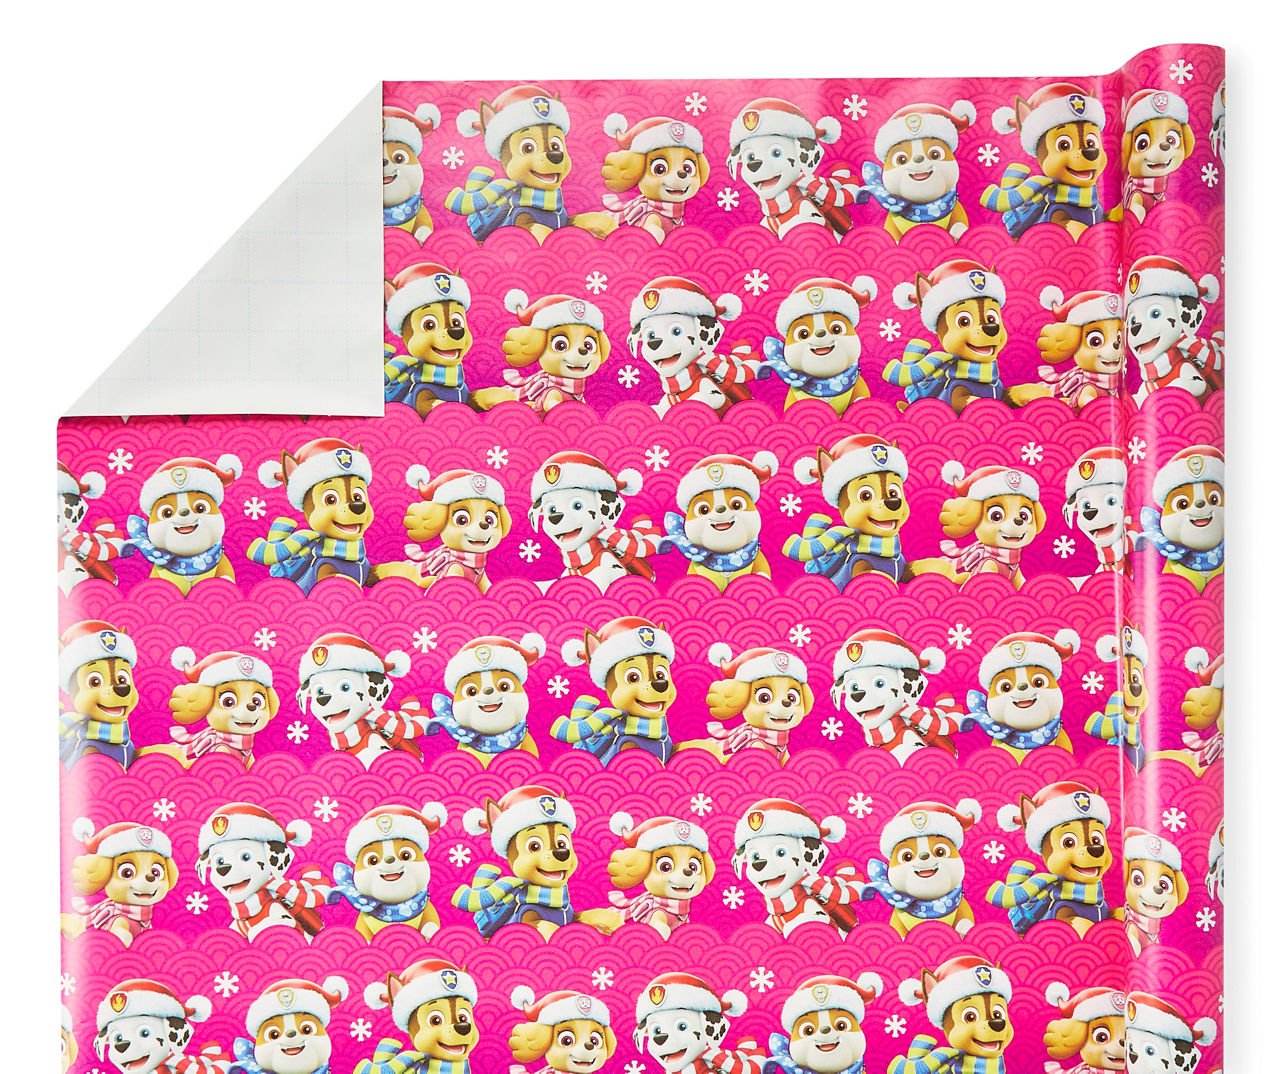 Happy Birthday Wrapping Paper Gift Wrapping Paper, Happy Birthday Wrapping  Paper Roll for Kids Boys Girls, Cartoon Coated Paper Gift Wrapping Paper